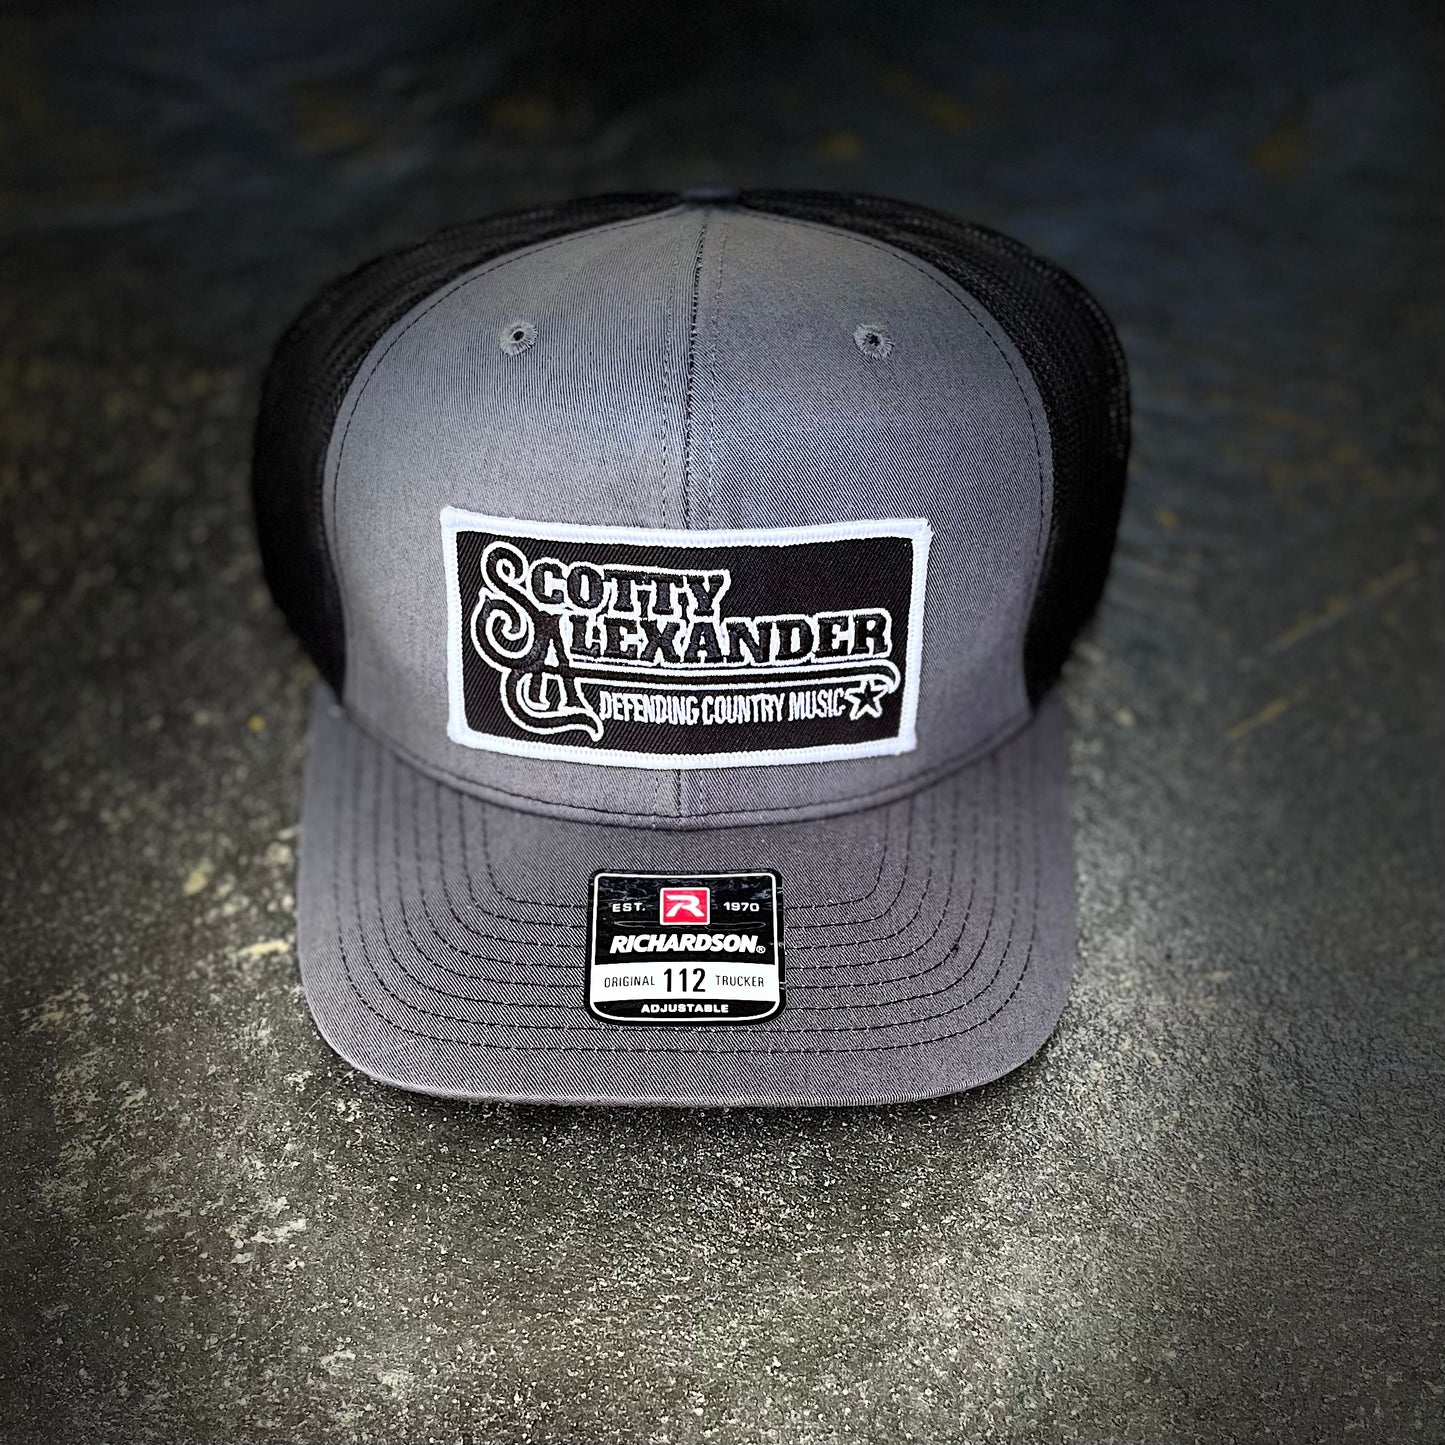 Black & Gray Scotty Alexander "Defending Country Music" Hat